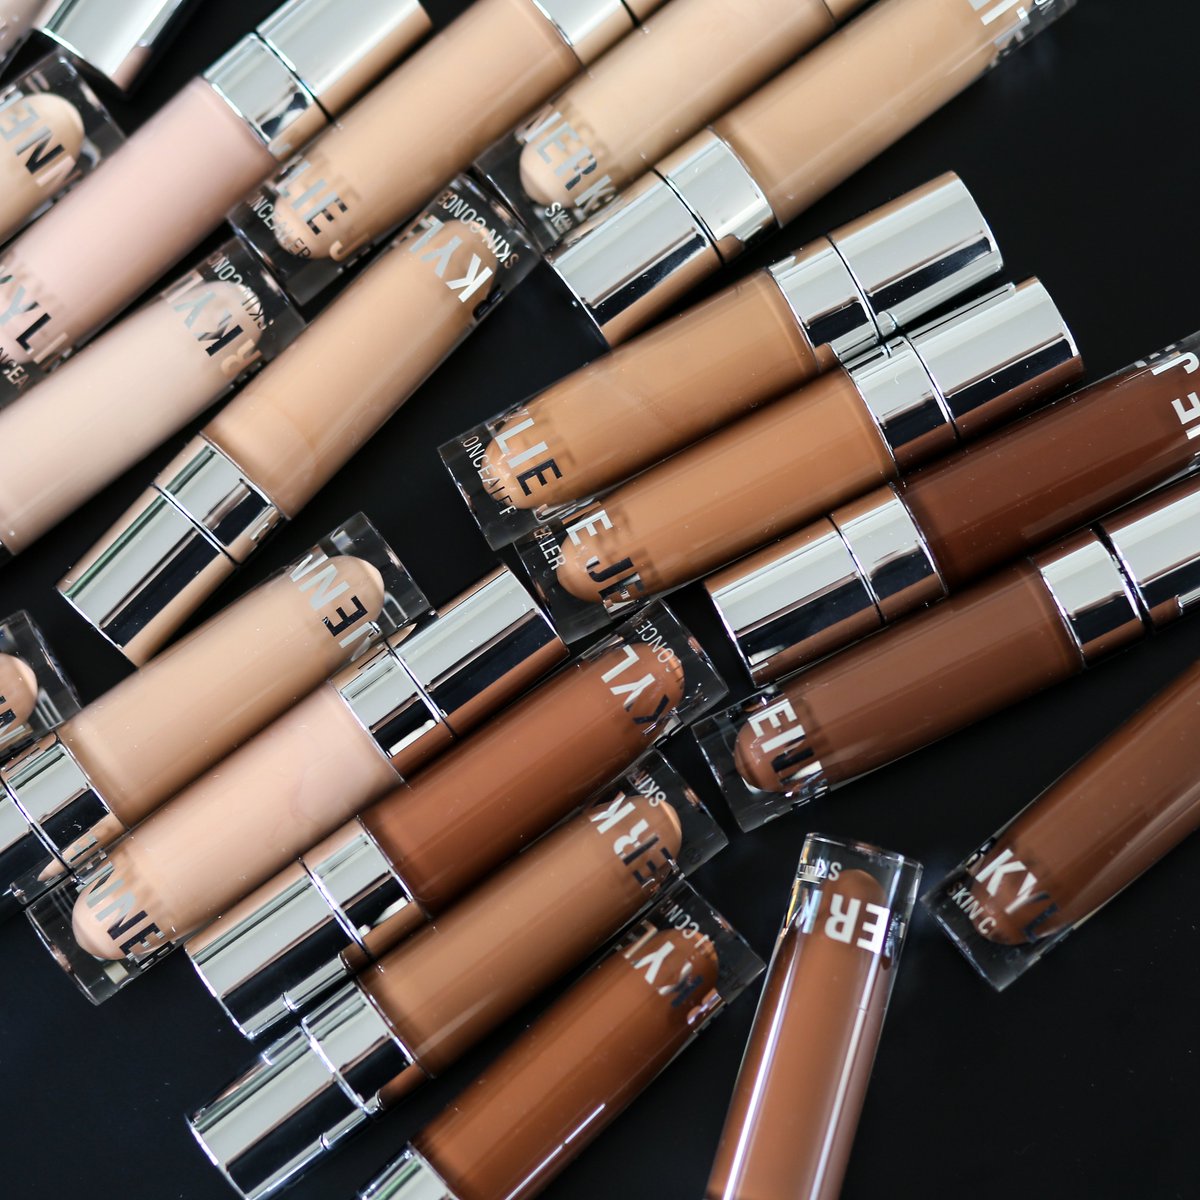 my @kyliecosmetics concealers and setting powders launch in all @ultabeauty stores this Sunday, July 28! https://t.co/6SI76Yy1L7